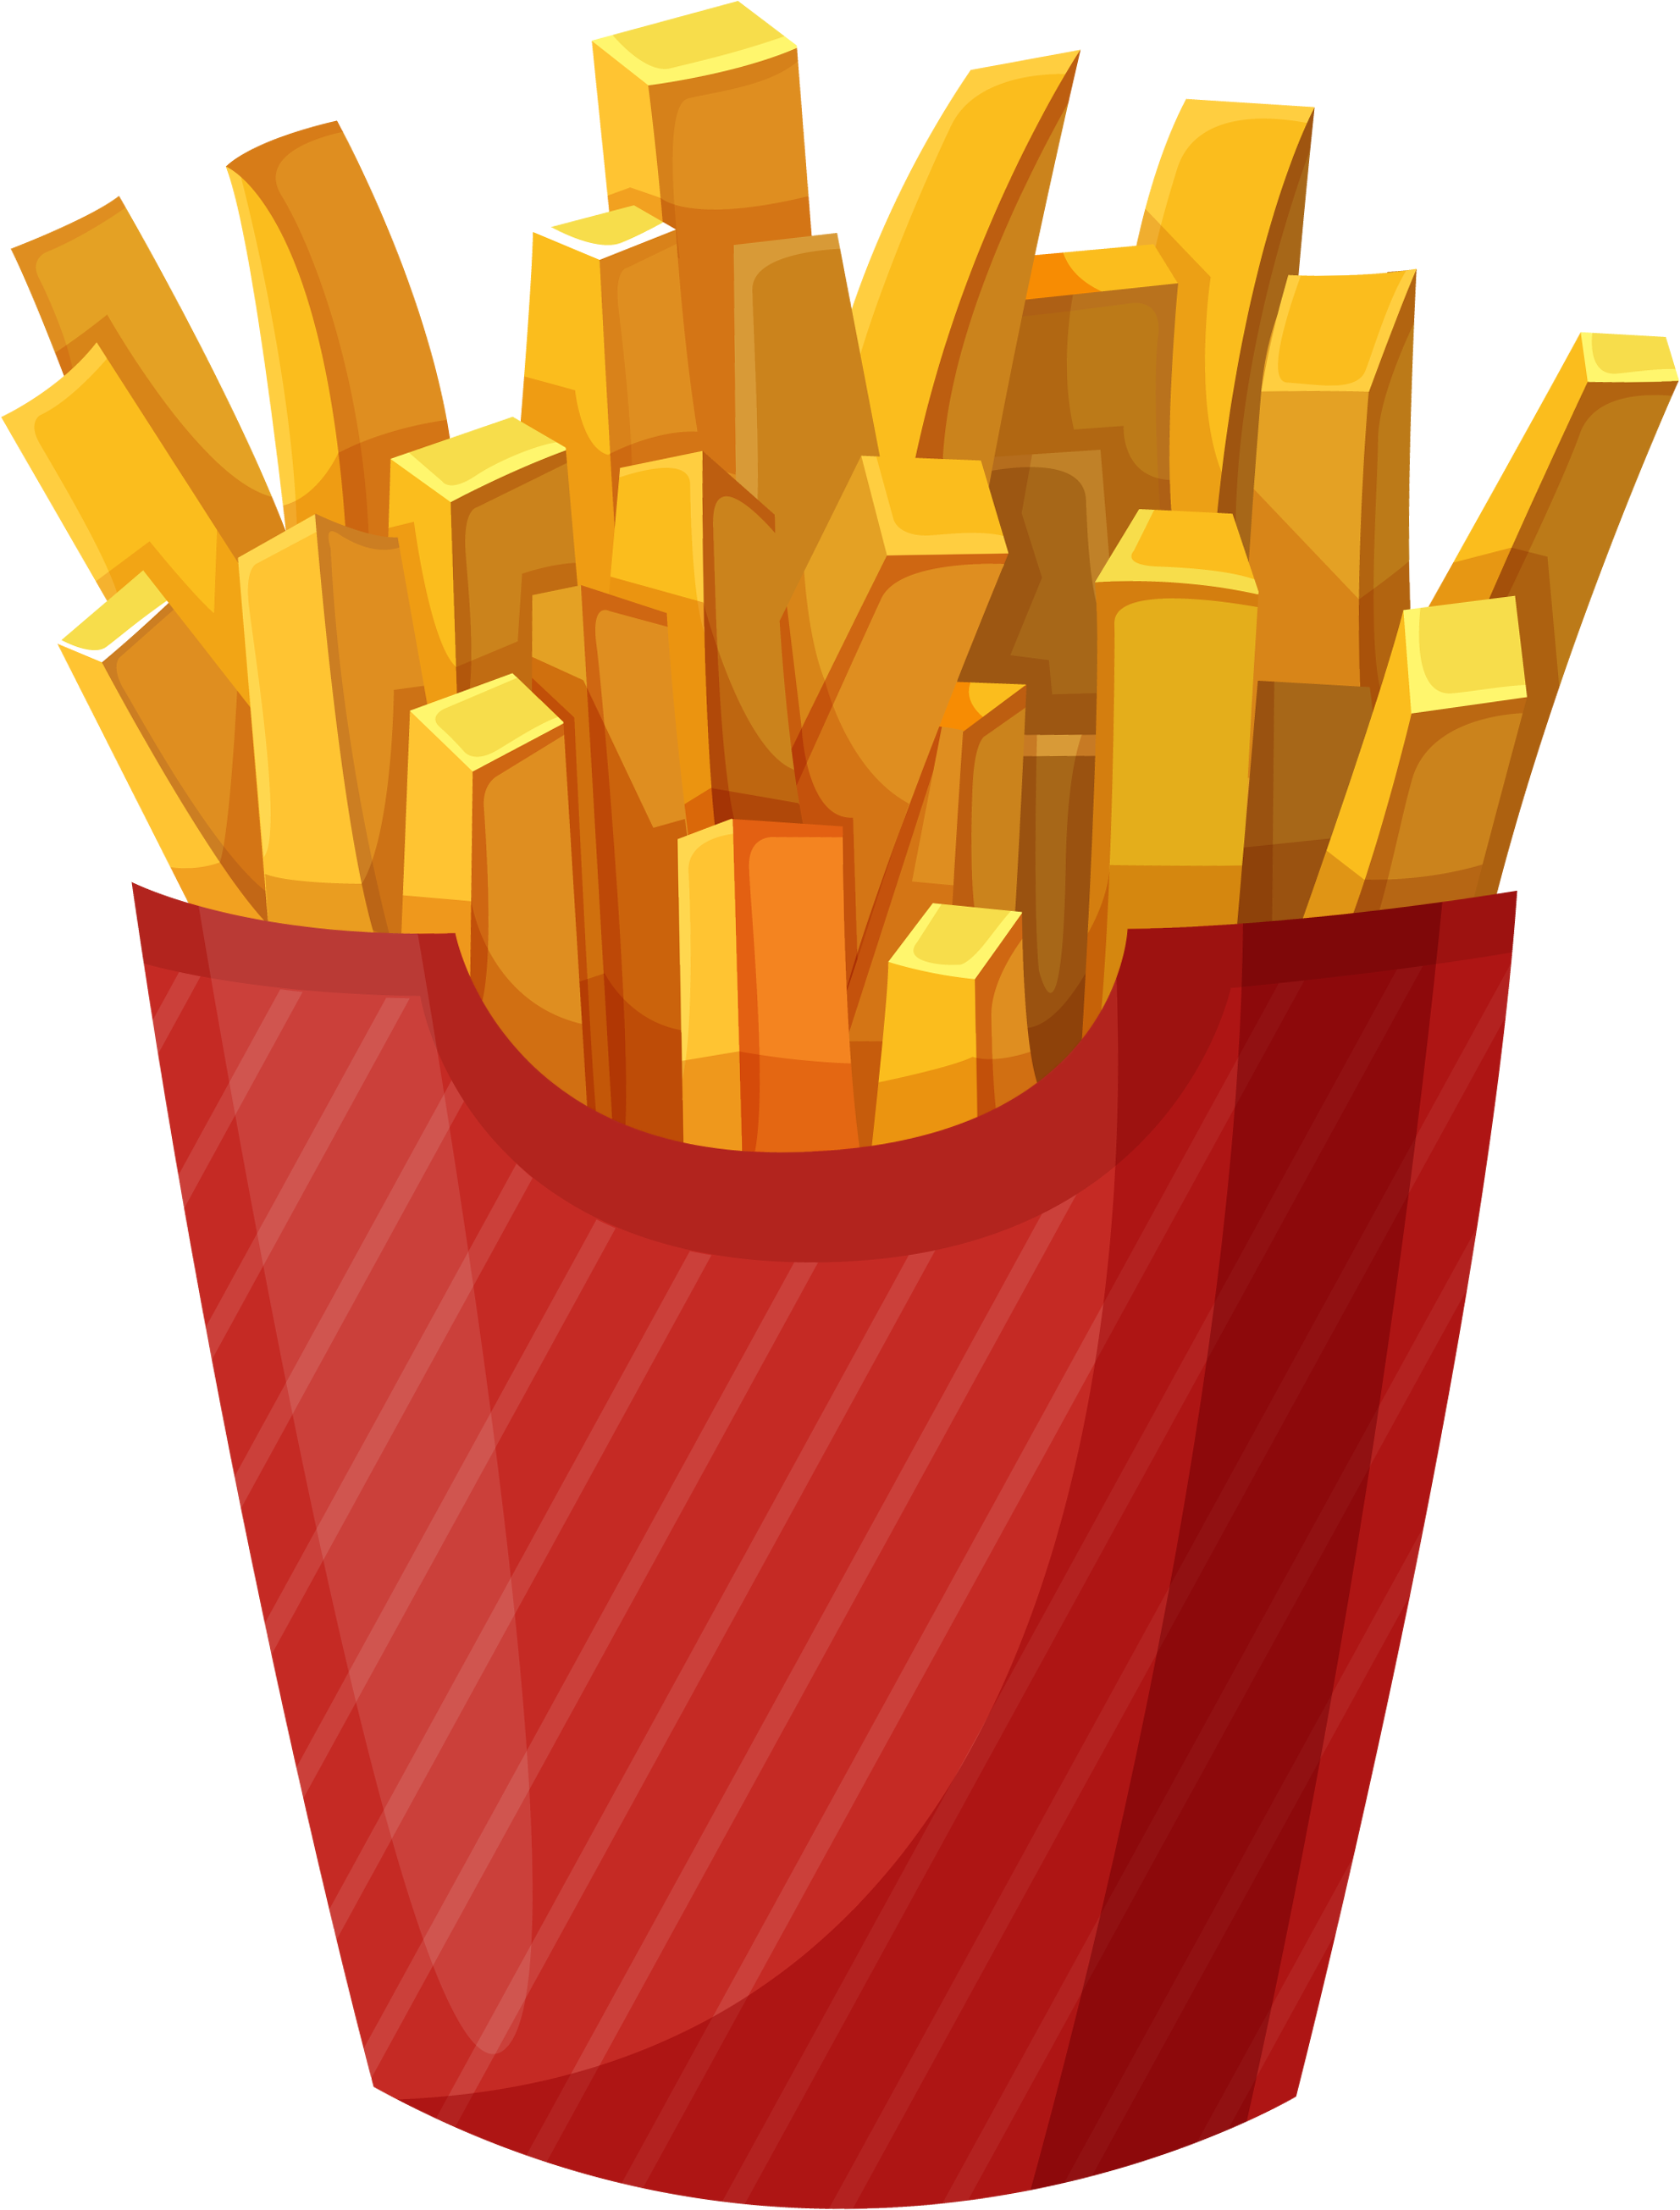 Golden French Fries Cartoon Illustration PNG